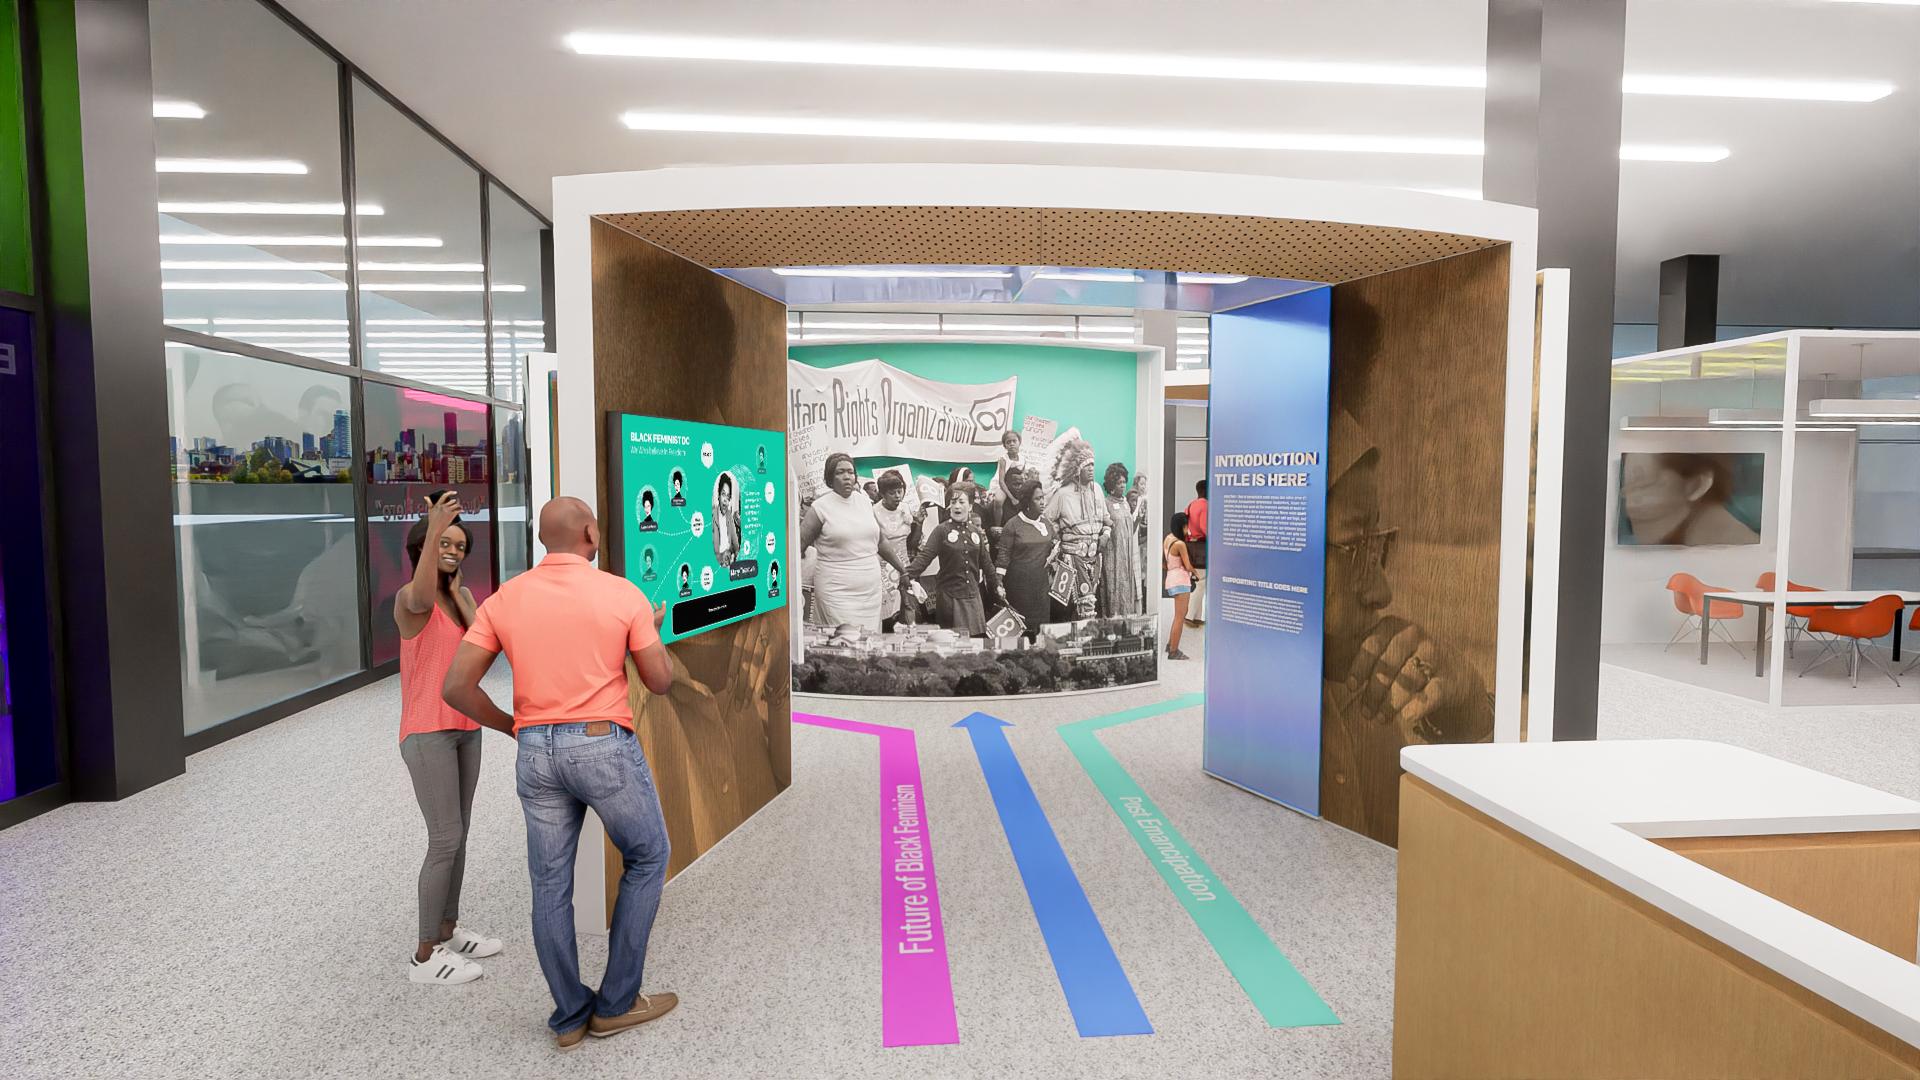 Several "passageway" structures clad with large images put the featured women at the front and center of the DC Black feminists movement. The exhibit will feature several interactives, both digital and analog,